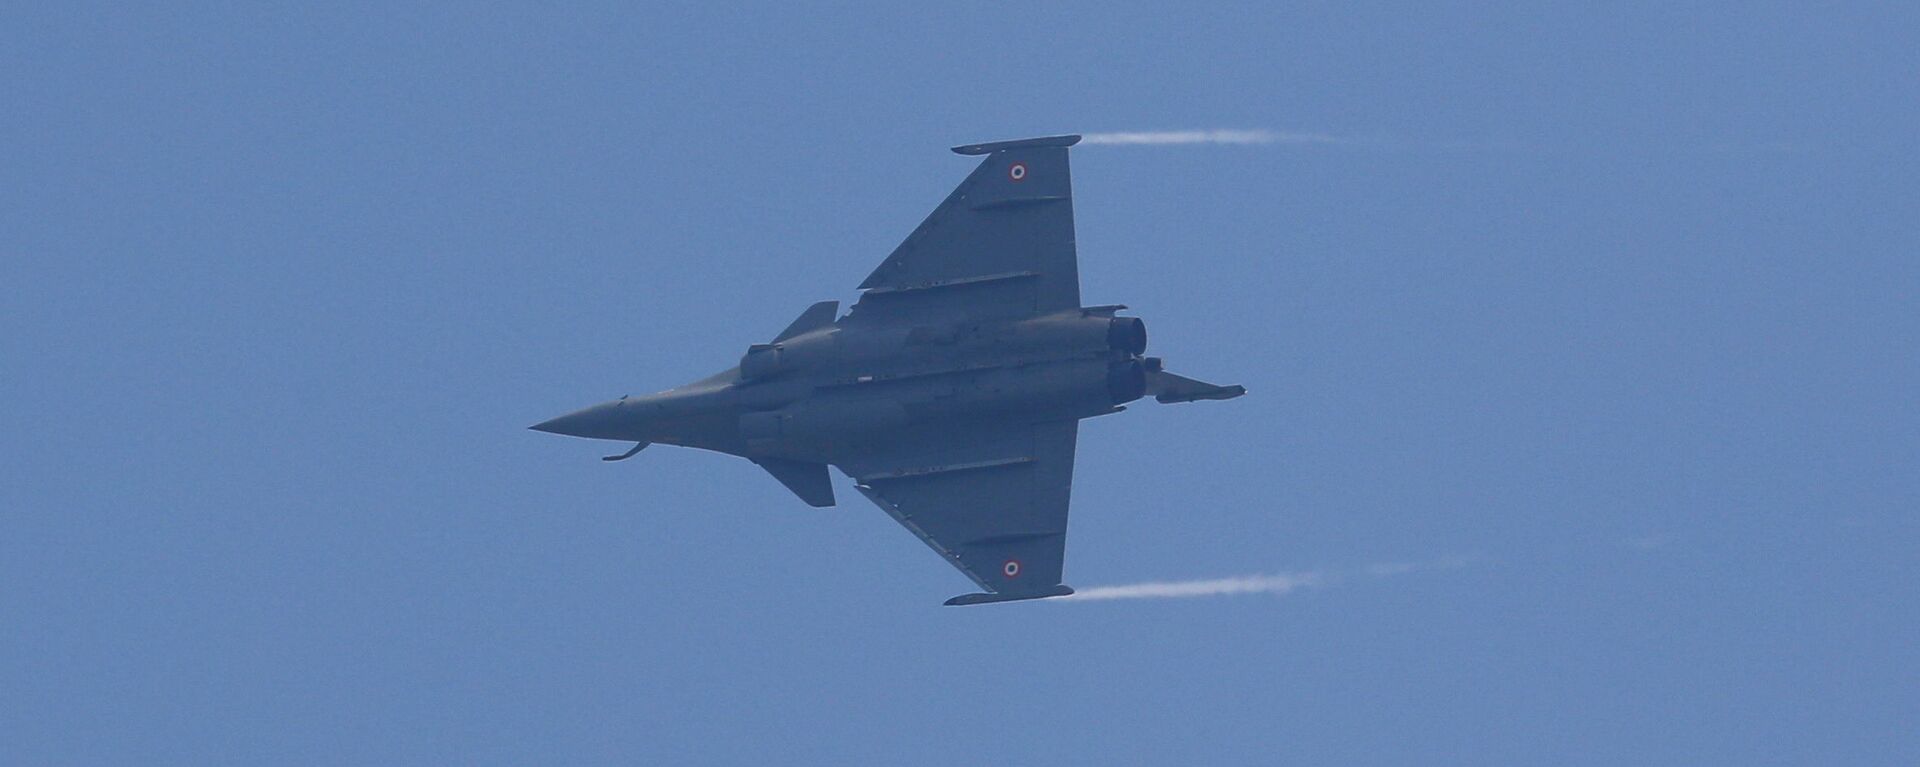 A Rafale fighter jet flies during its induction ceremony at an air force station in Ambala, India, September 10, 2020.  - Sputnik International, 1920, 10.09.2020